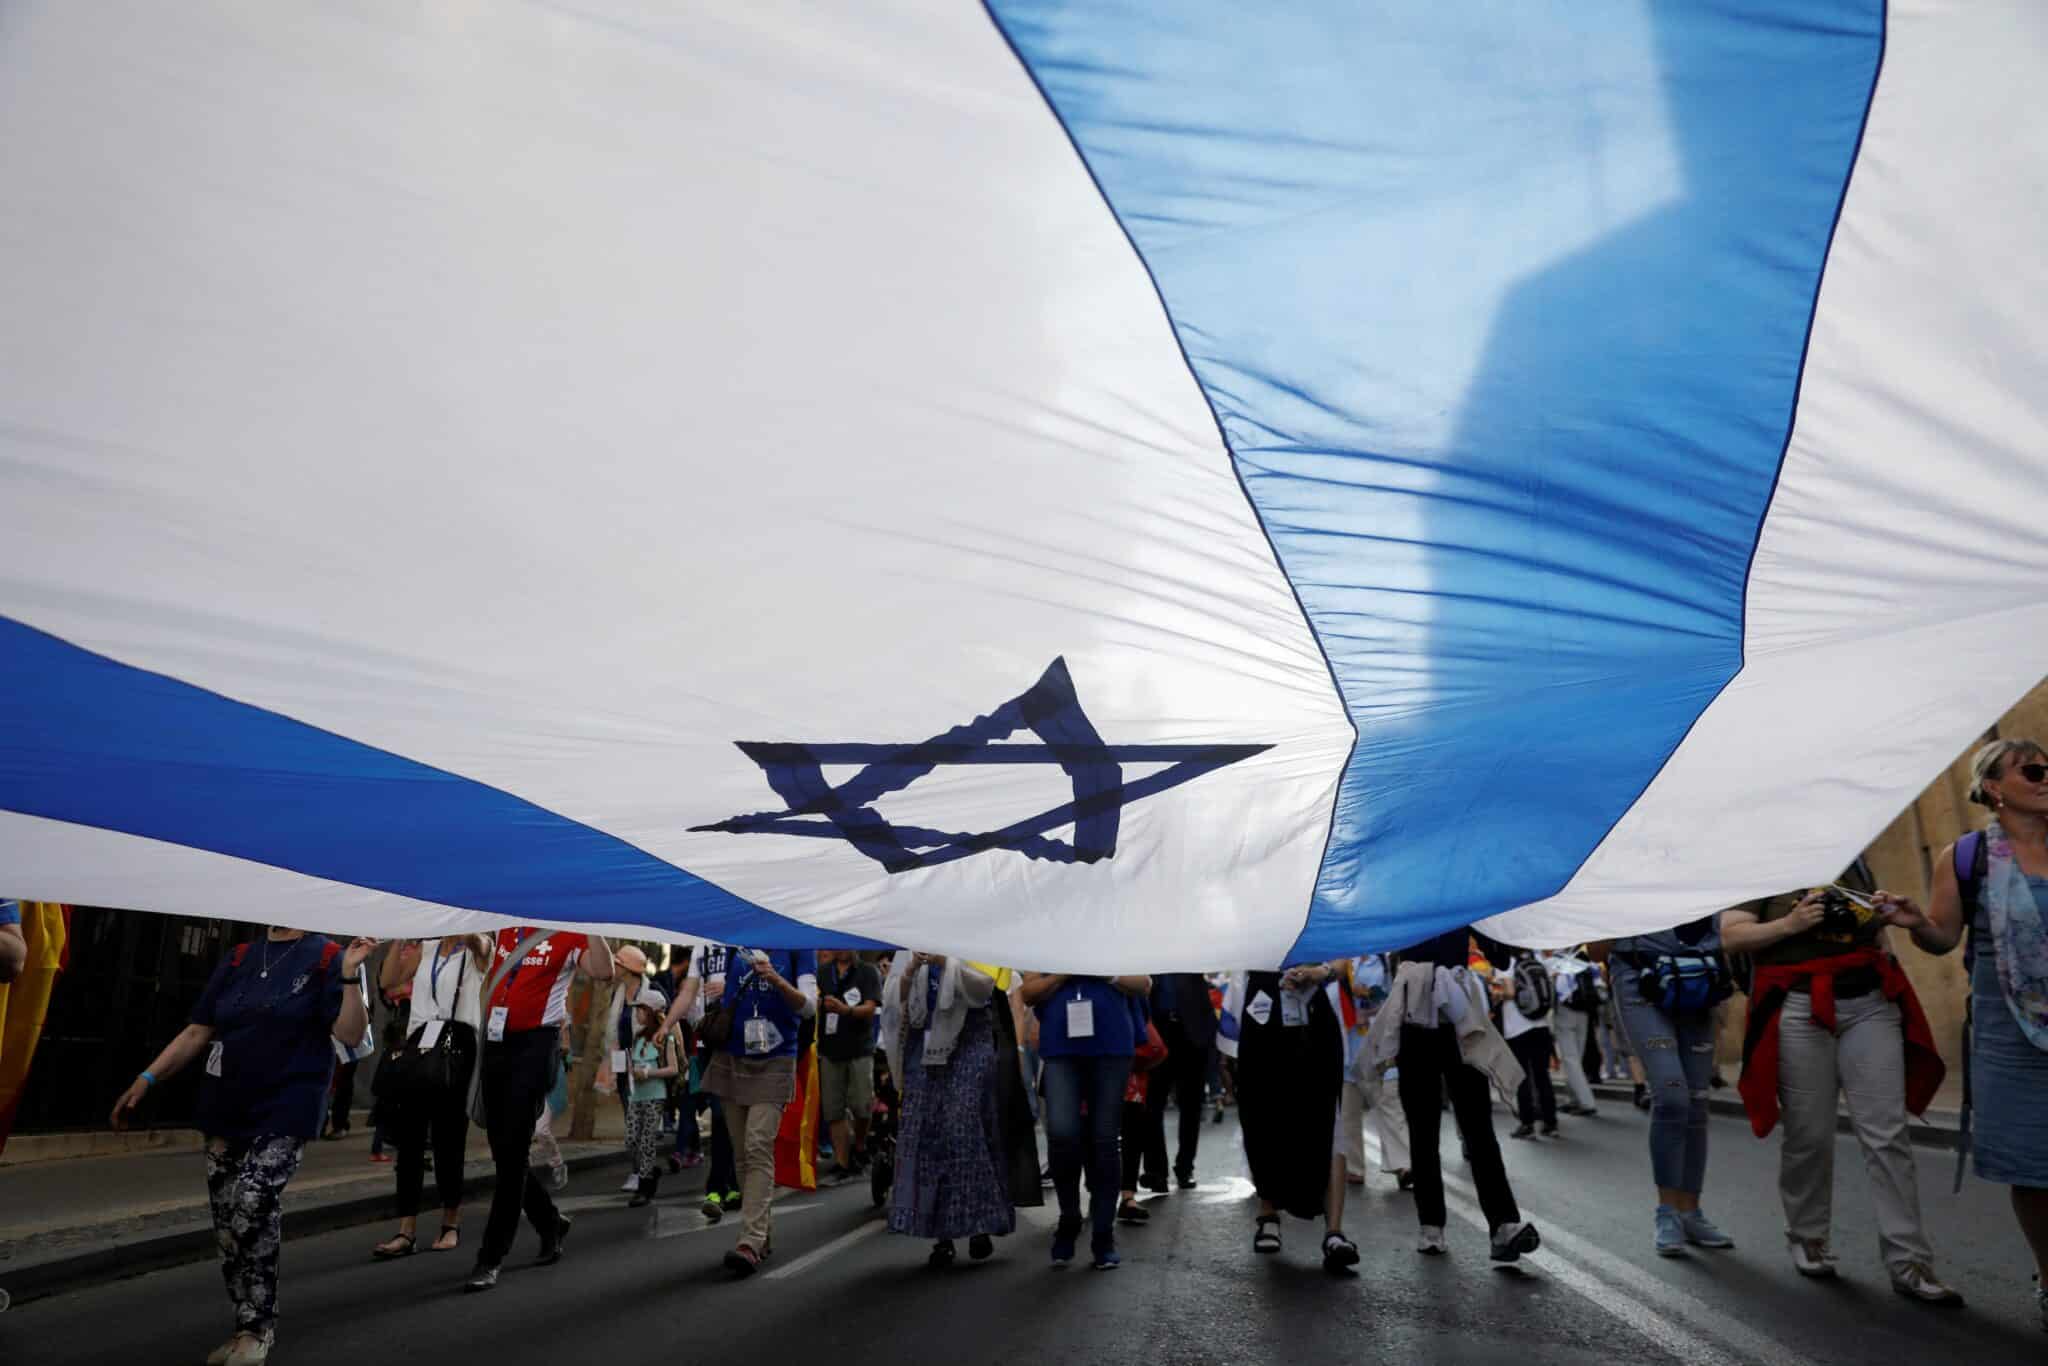 People in Jerusalem take part in the "March of the Nations" March 15 in which Christians from around the world demonstrate against anti-Semitism. (CNS photo/Ronen Zvulun, Reuters) See ANTI-SEMITISM-LETTER May 17, 2018.